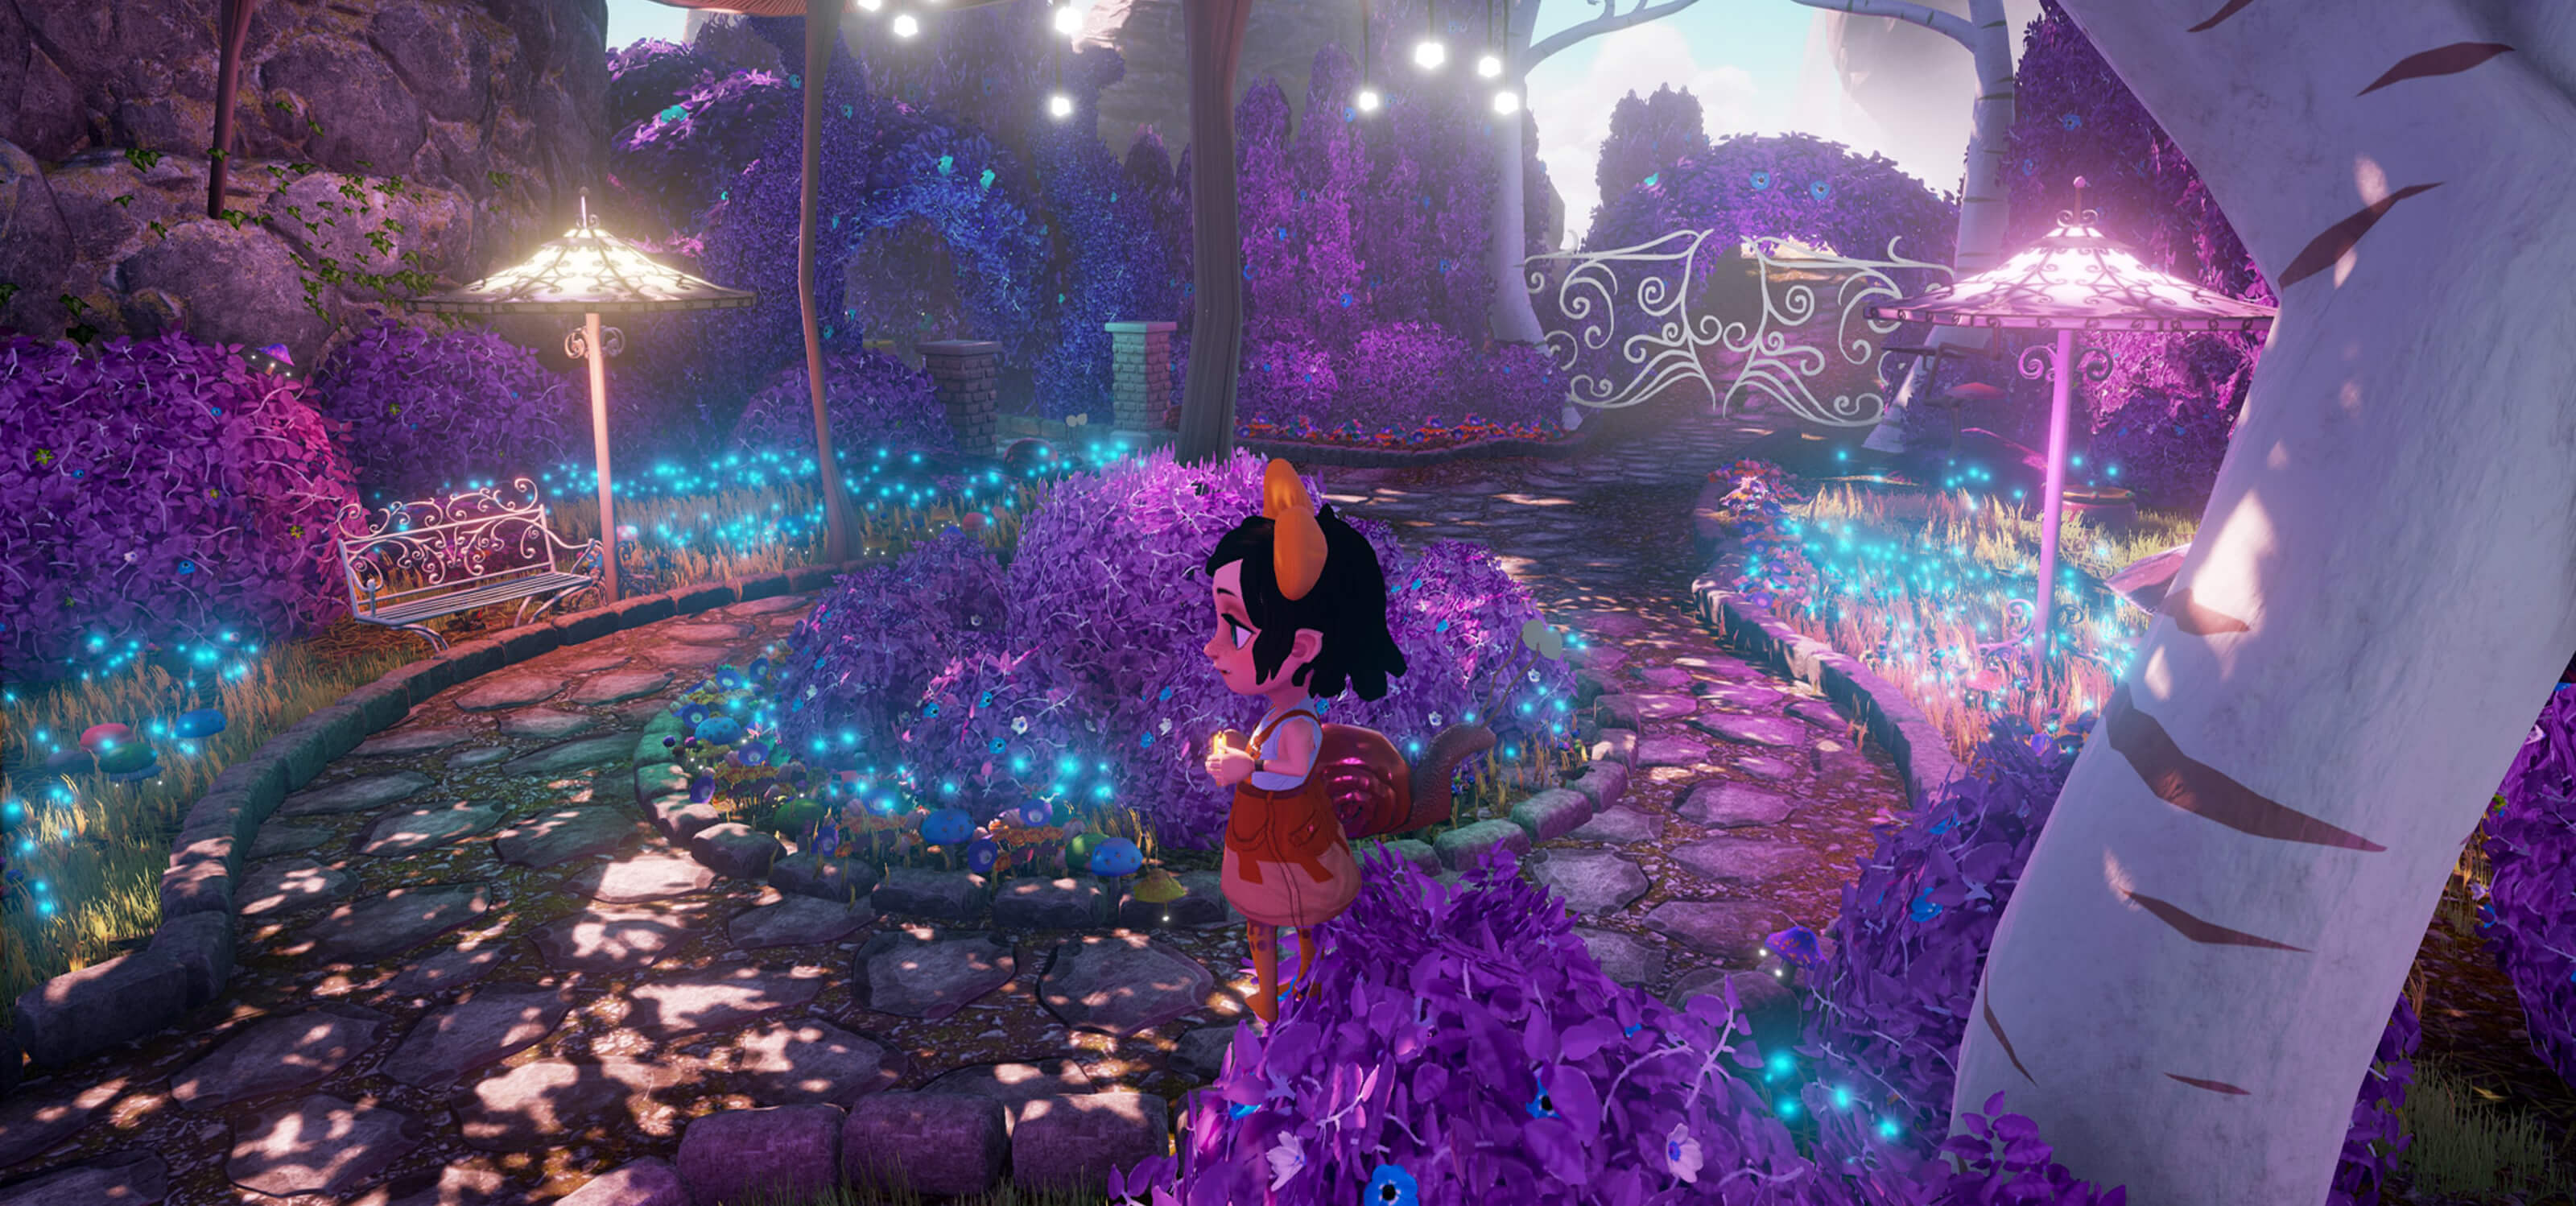 Screenshot from DigiPen student game Somnus of Melanie, a young girl in a magical garden rendered in shades of purple